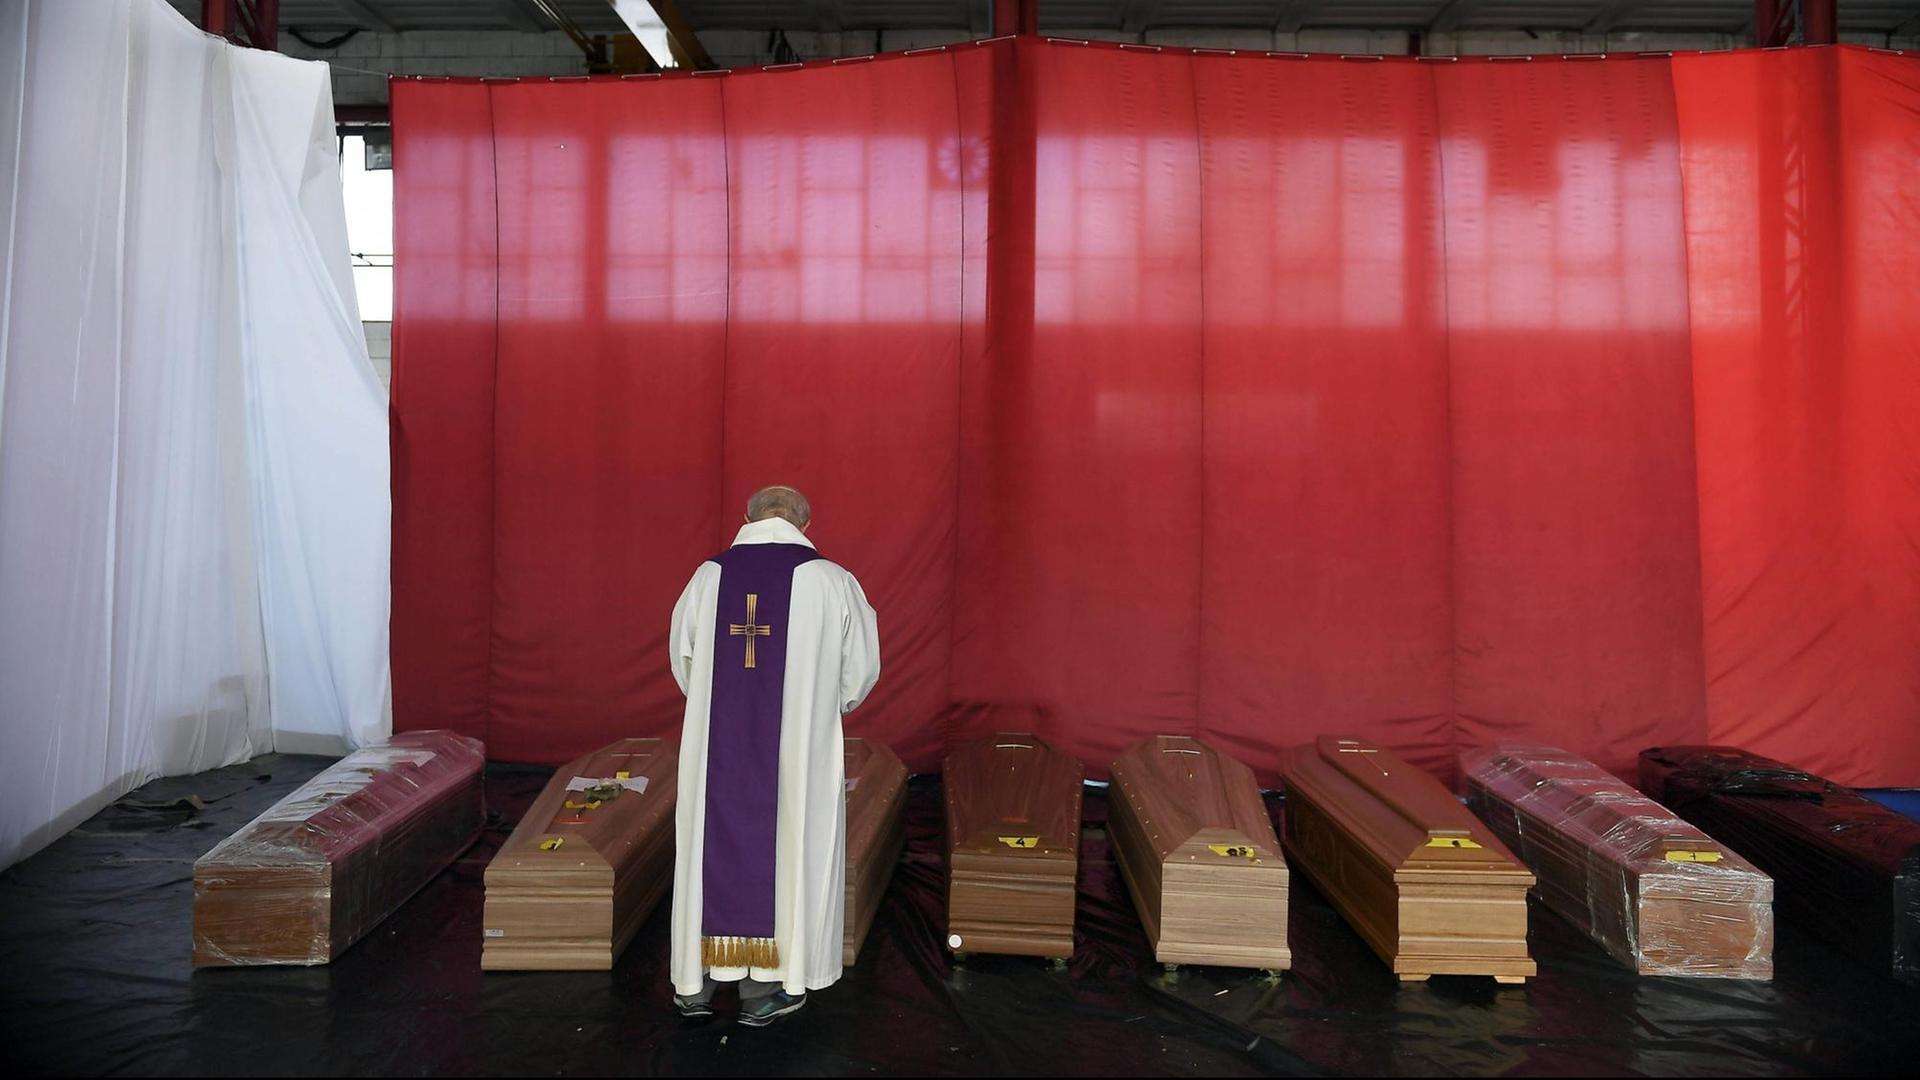 Italy, Lombardy region, Ponte San Pietro (Bergamo), April 13, 2020 : Coronavirus emergency, Covid-19. In the picture the priest blesses coffins in a deposit, in Ponte San Pietro in the province of Bergamo. They are the deaths caused by the coronavirus pandemic. Photo © Matteo Biatta/Sintesi |